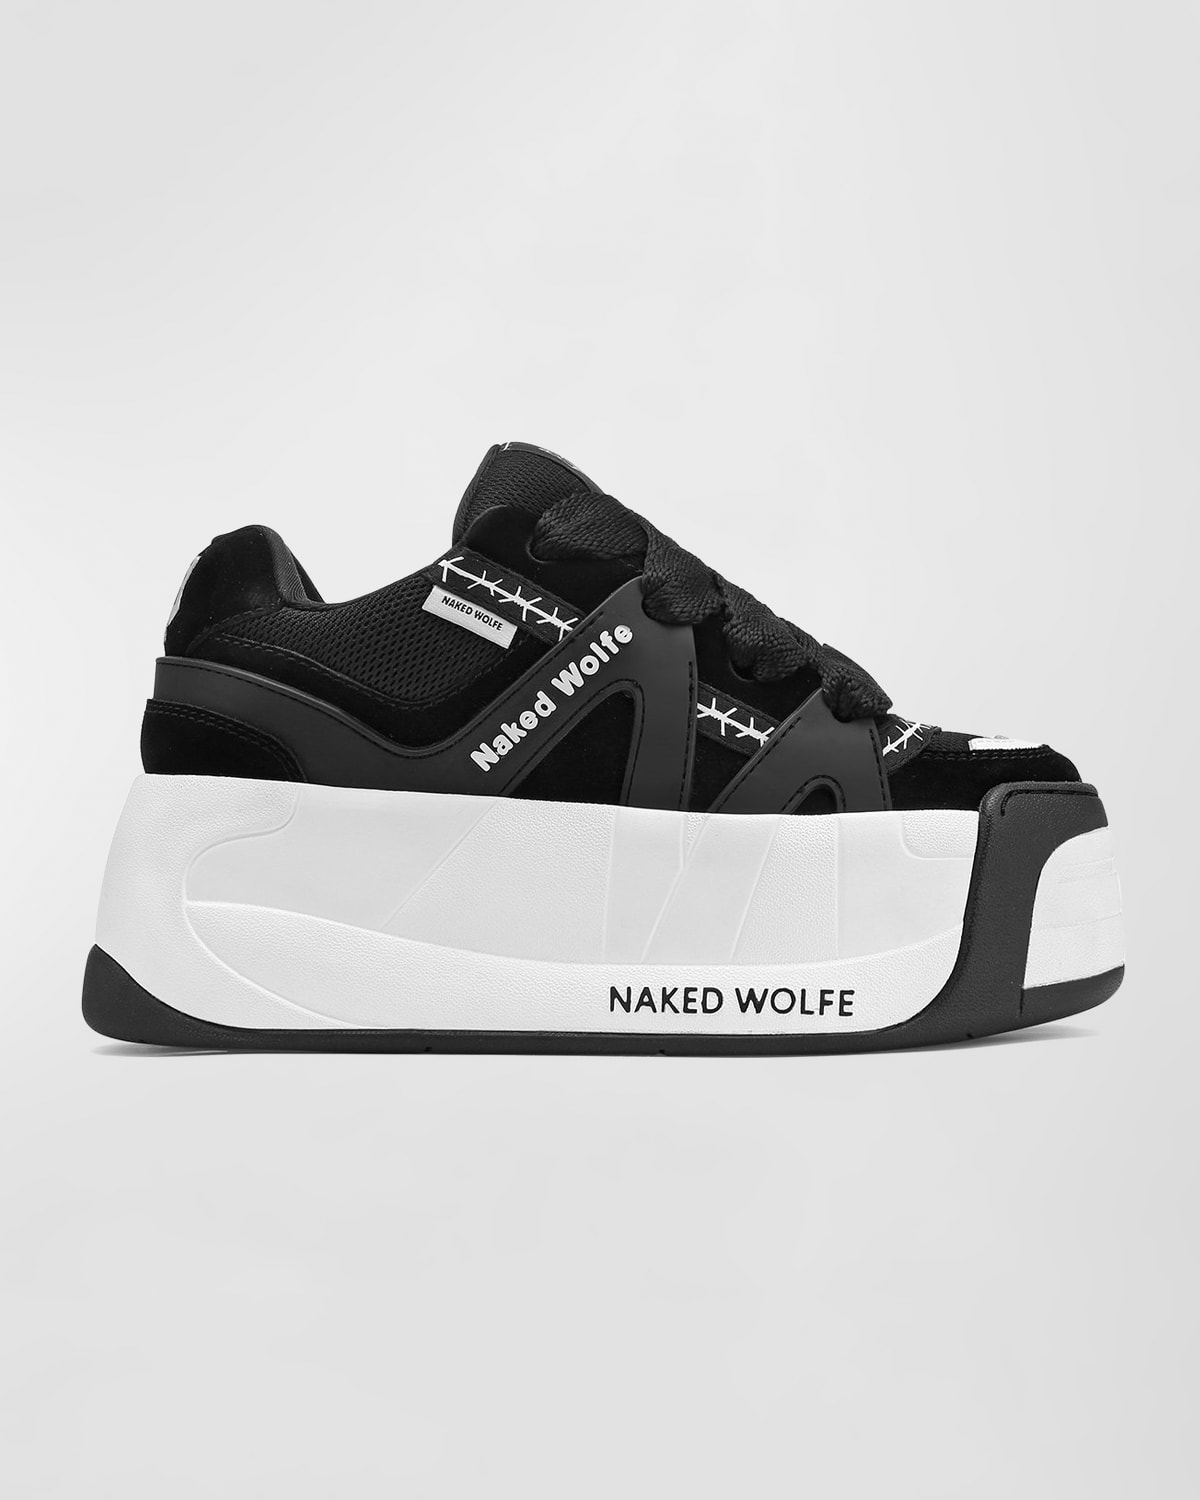 Naked wolfe Sporty Chunky Sneakers | Smart Closet